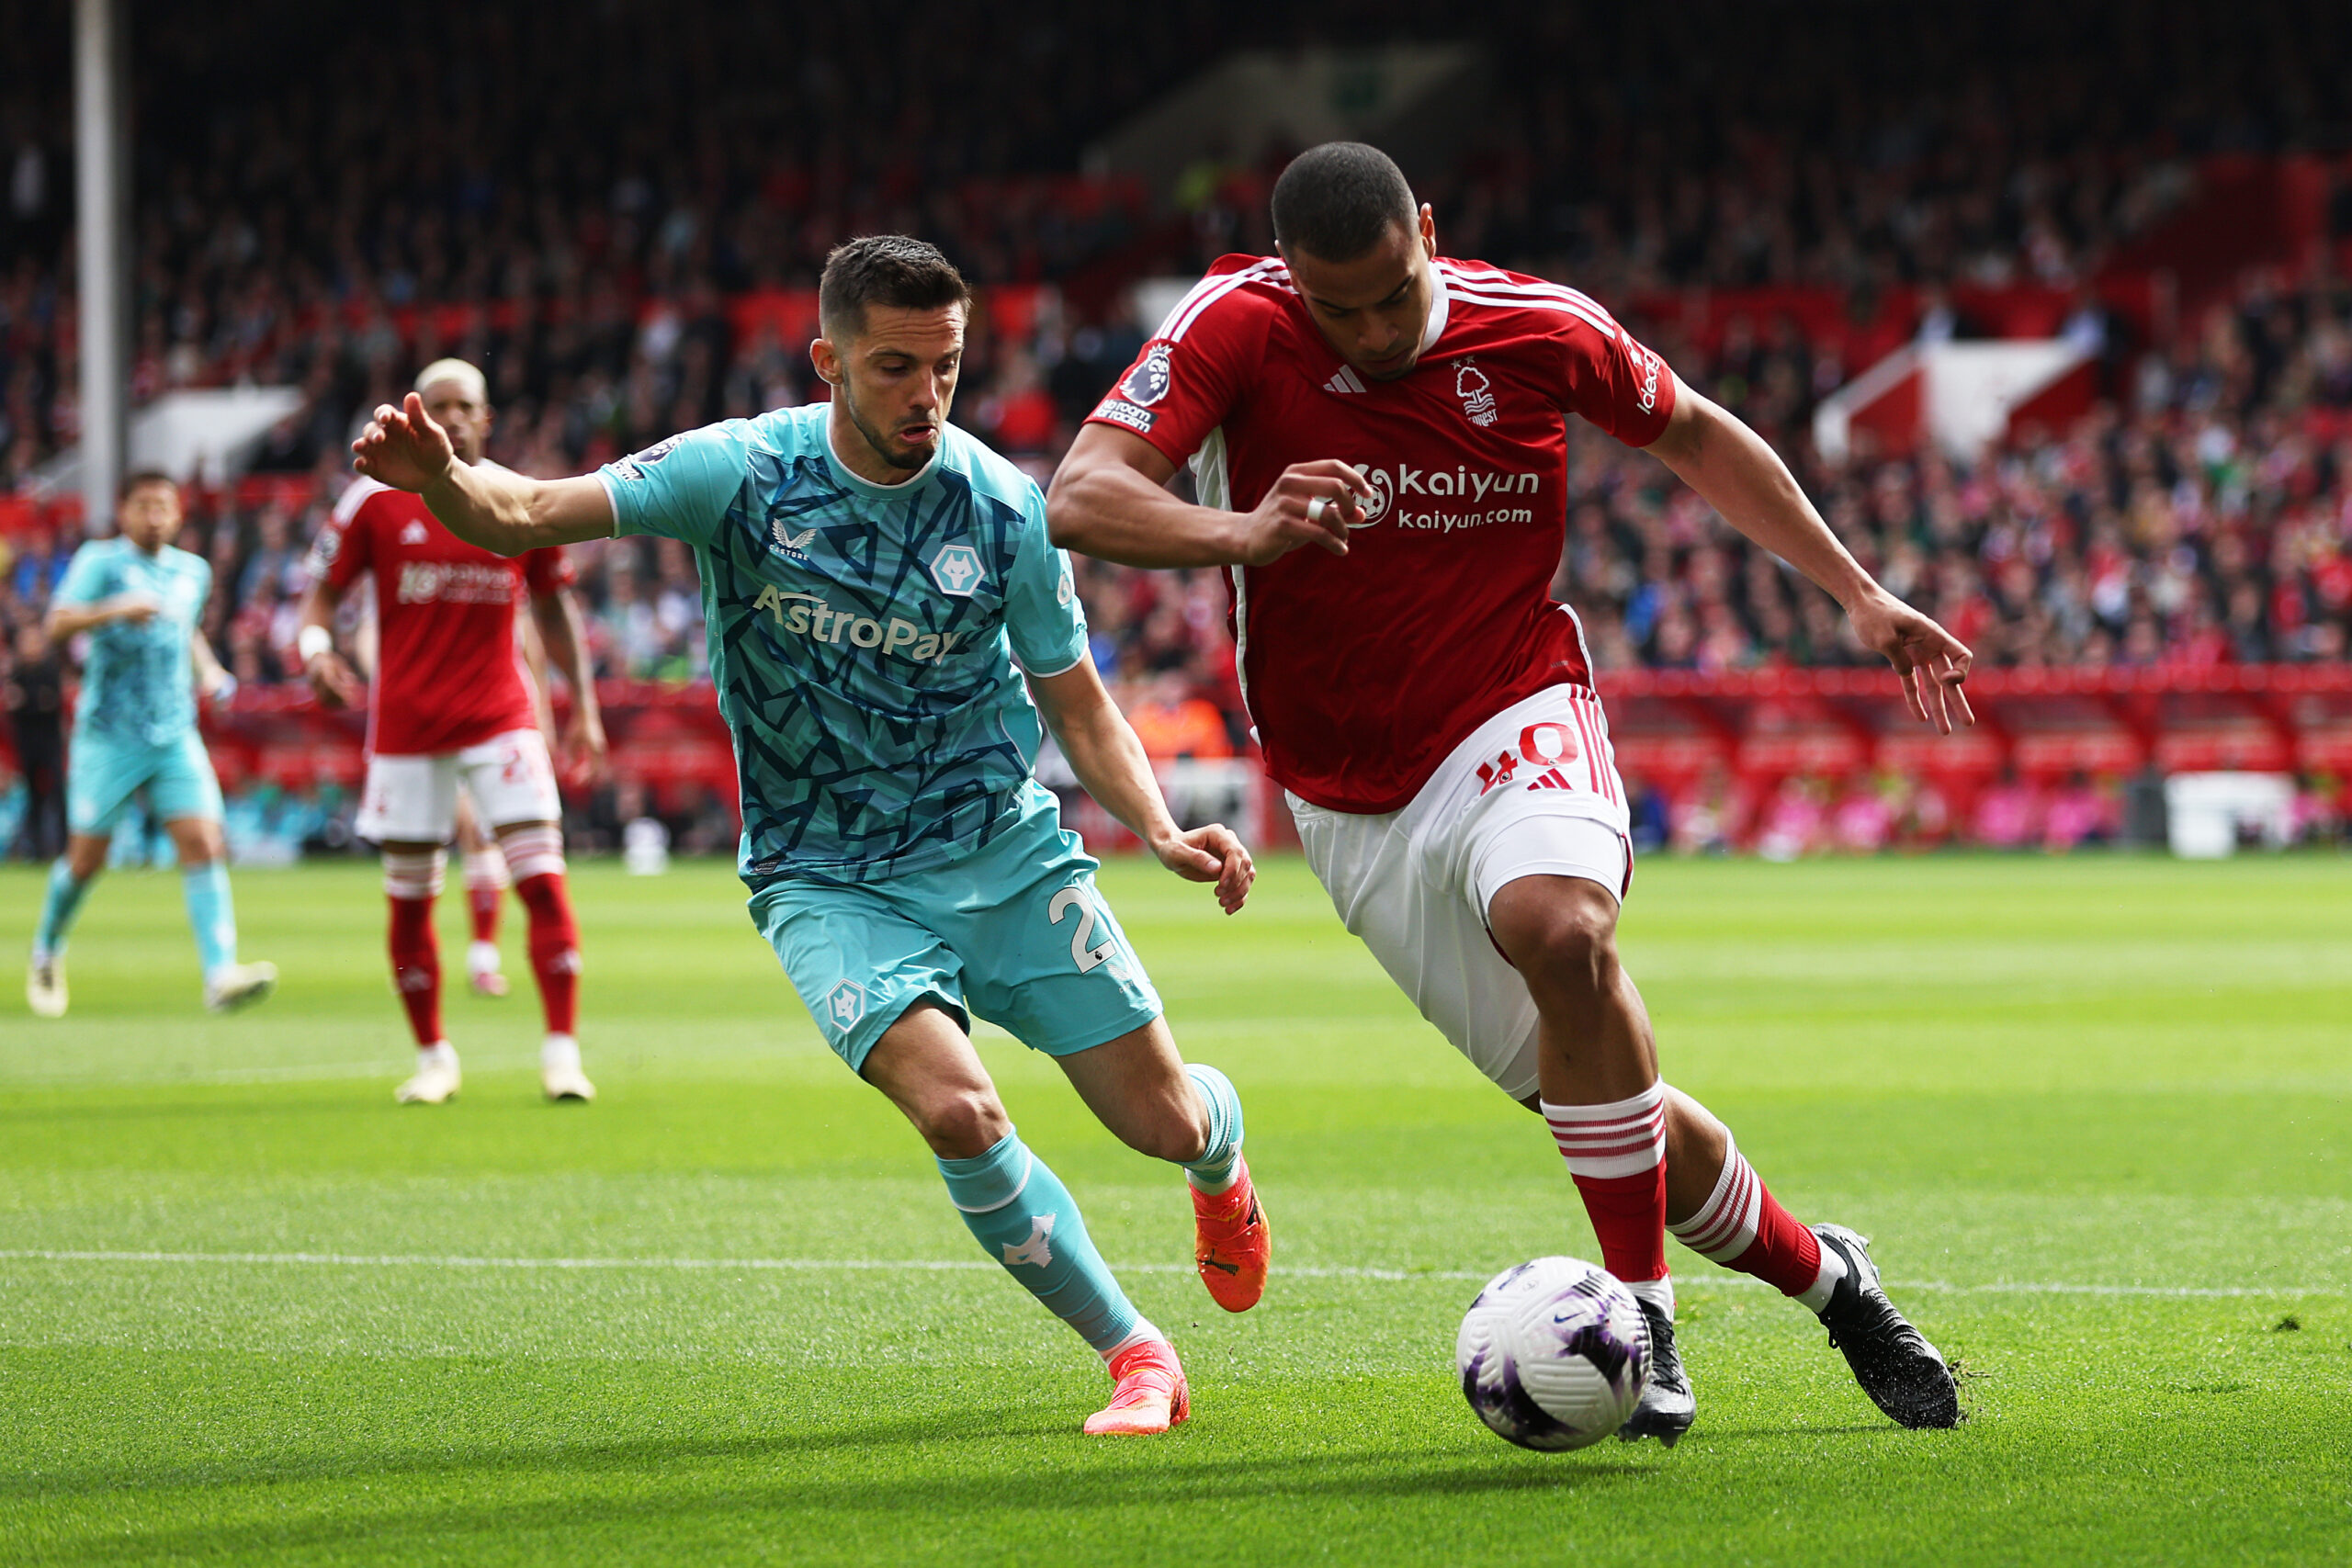 NOTTINGHAM, ENGLAND - APRIL 13: Murillo of Nottingham Forest runs with the ball under pressure from Pablo Sarabia of Wolverhampton Wanderers during the Premier League match between Nottingham Forest and Wolverhampton Wanderers at City Ground on April 13, 2024 in Nottingham, England.